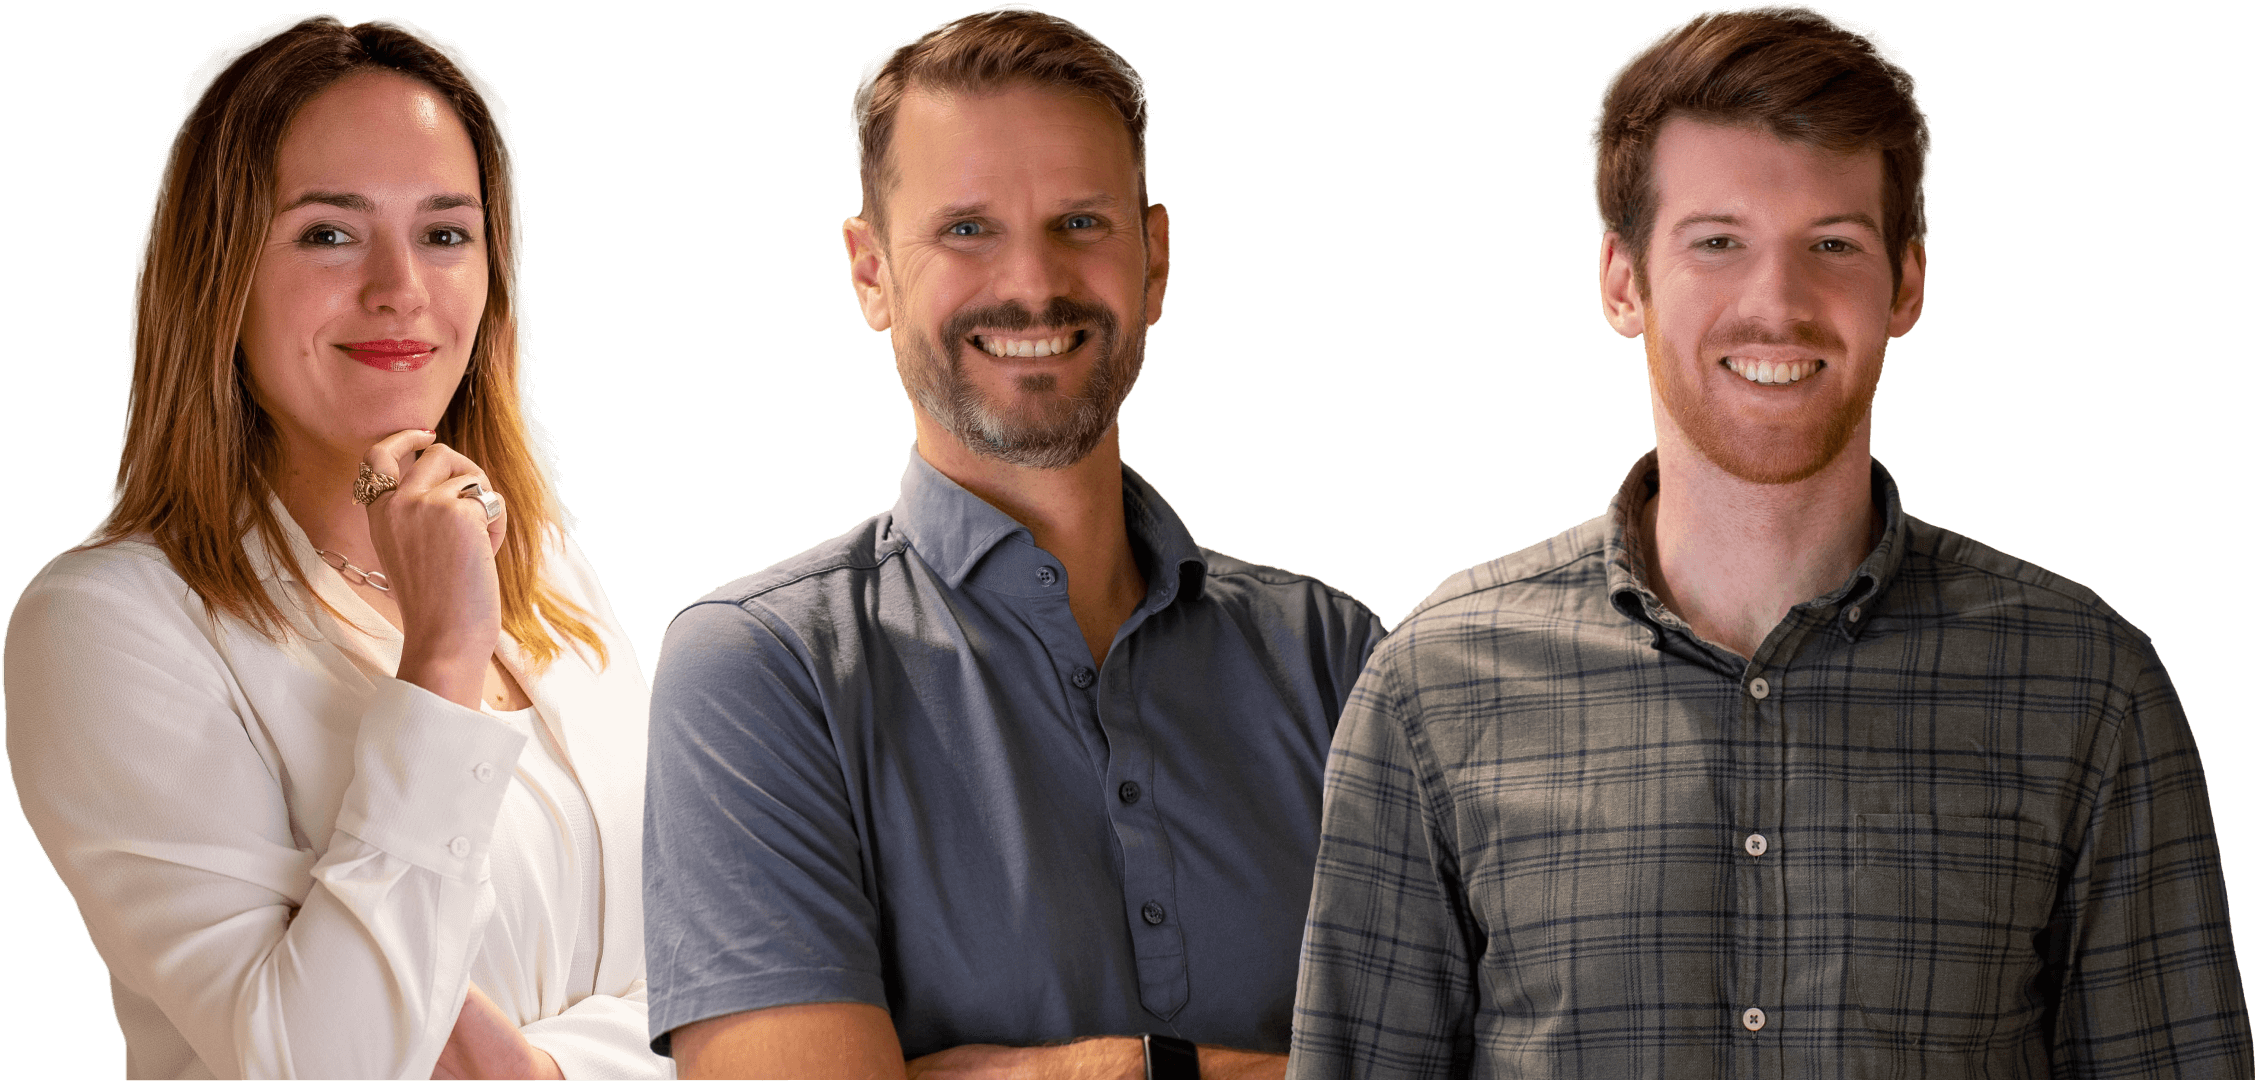 Three members of the Autobahn Security customer success team smiling. The team members are shown in a friendly and welcoming manner, inviting users to reach out to the company for support.